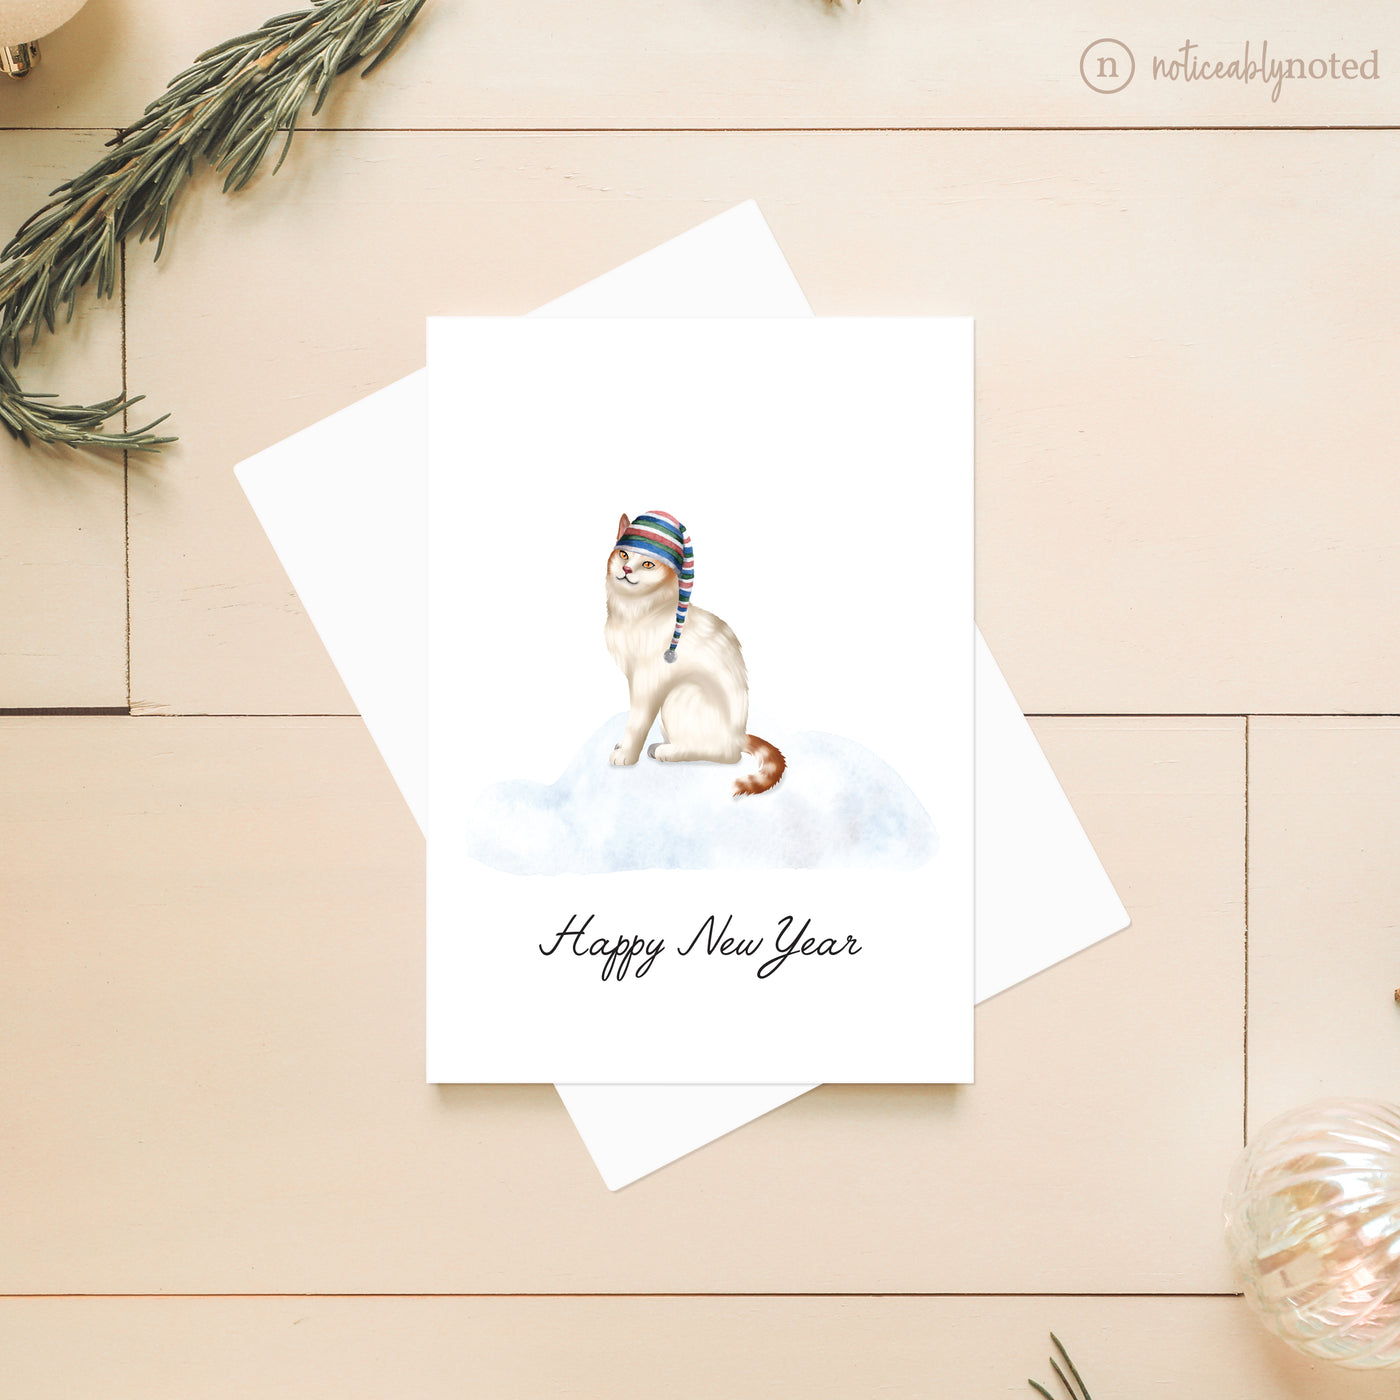 Turkish Van Holiday Card | Noticeably Noted